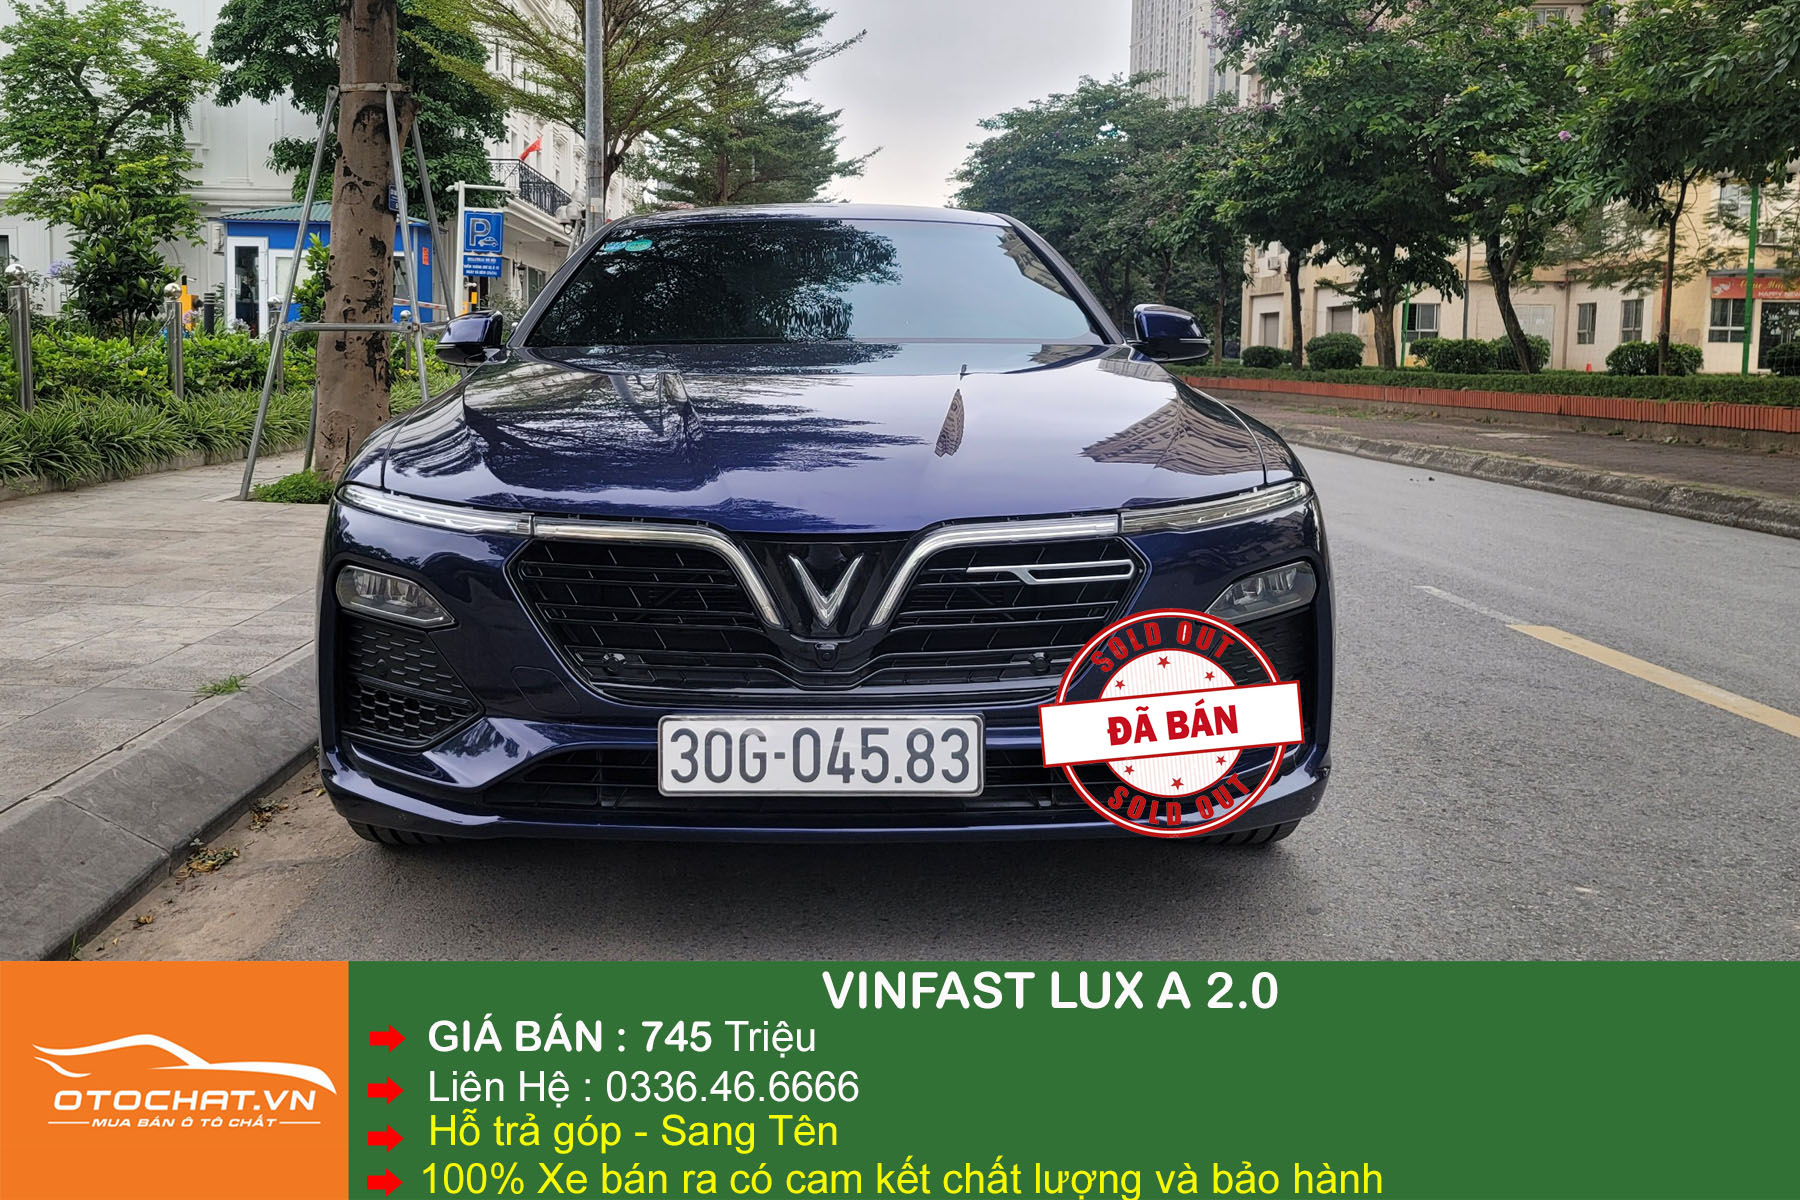 VinFast Lux A 2.0 Turbo 2019